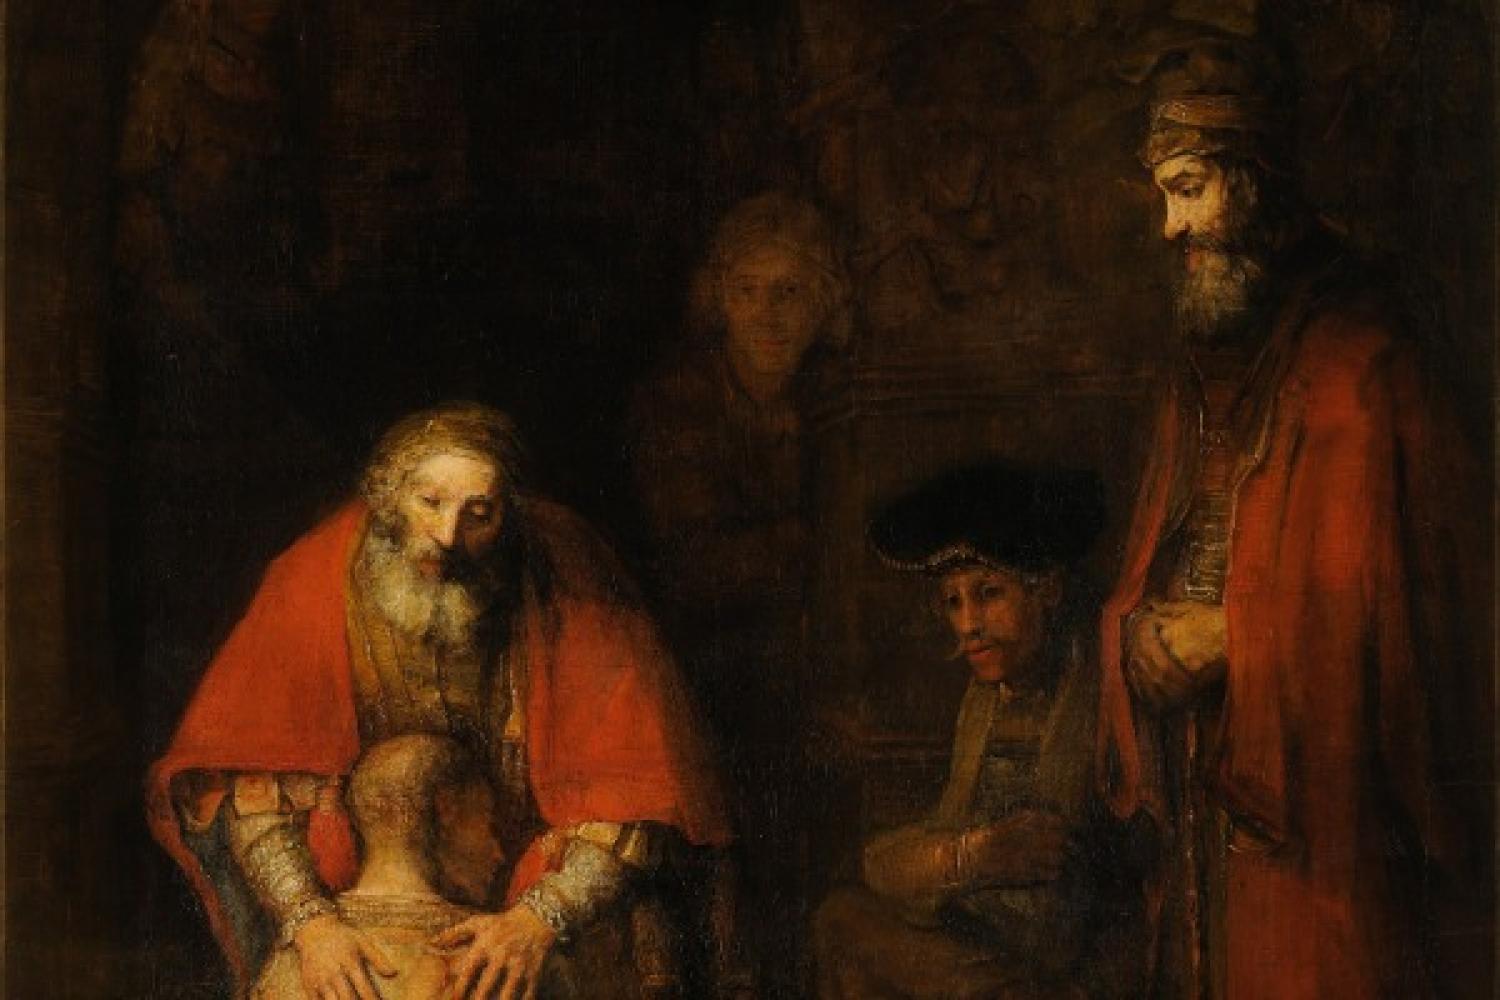 Rembrant's "The Return of the Prodigal Son"